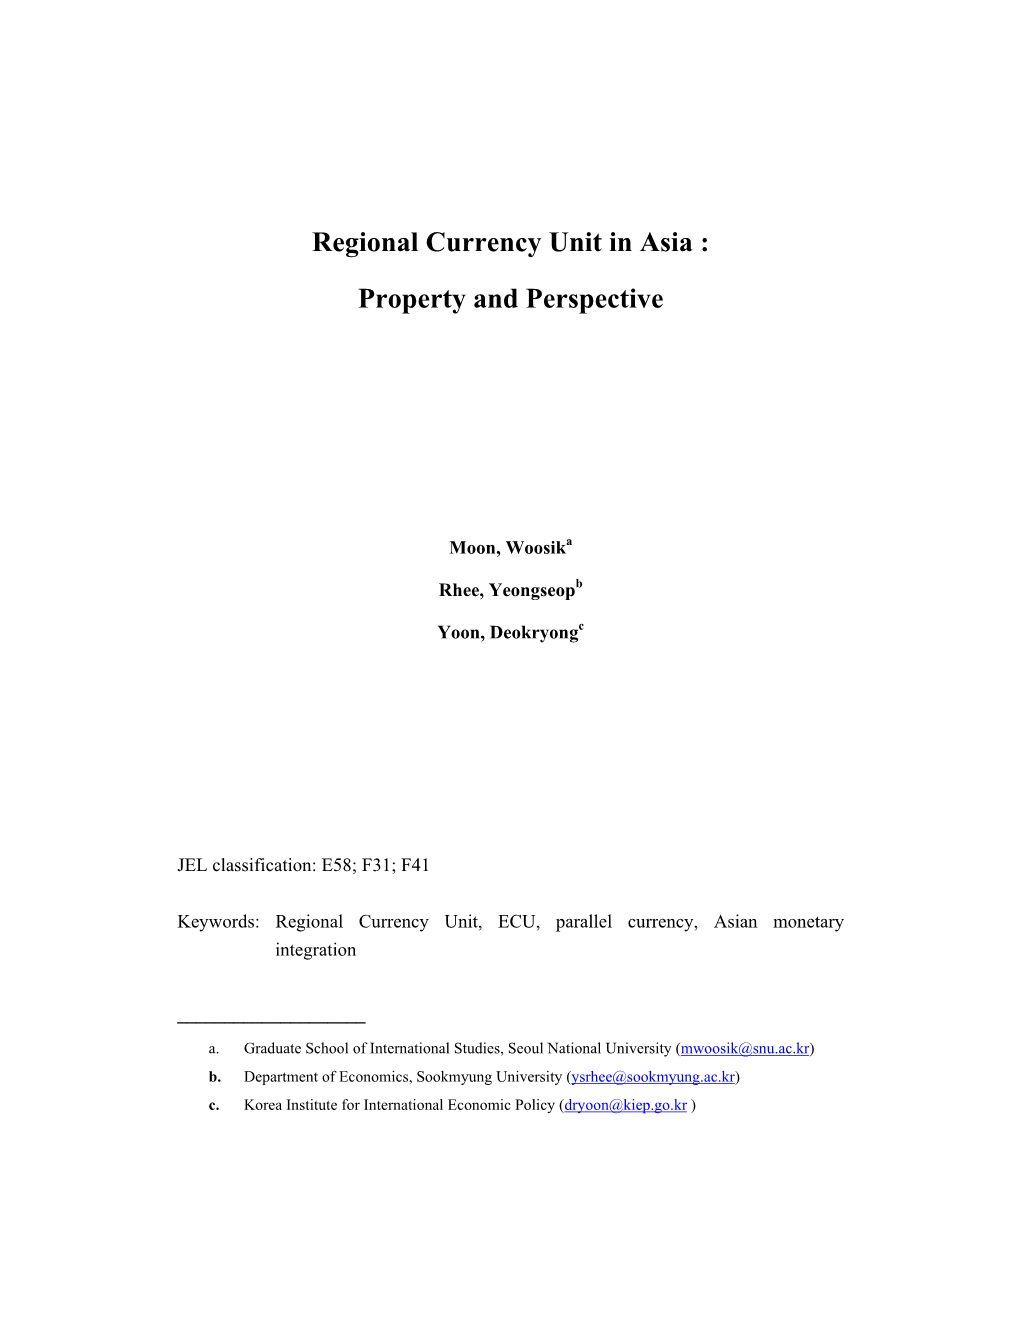 Regional Currency Unit in Asia : Property and Perspective